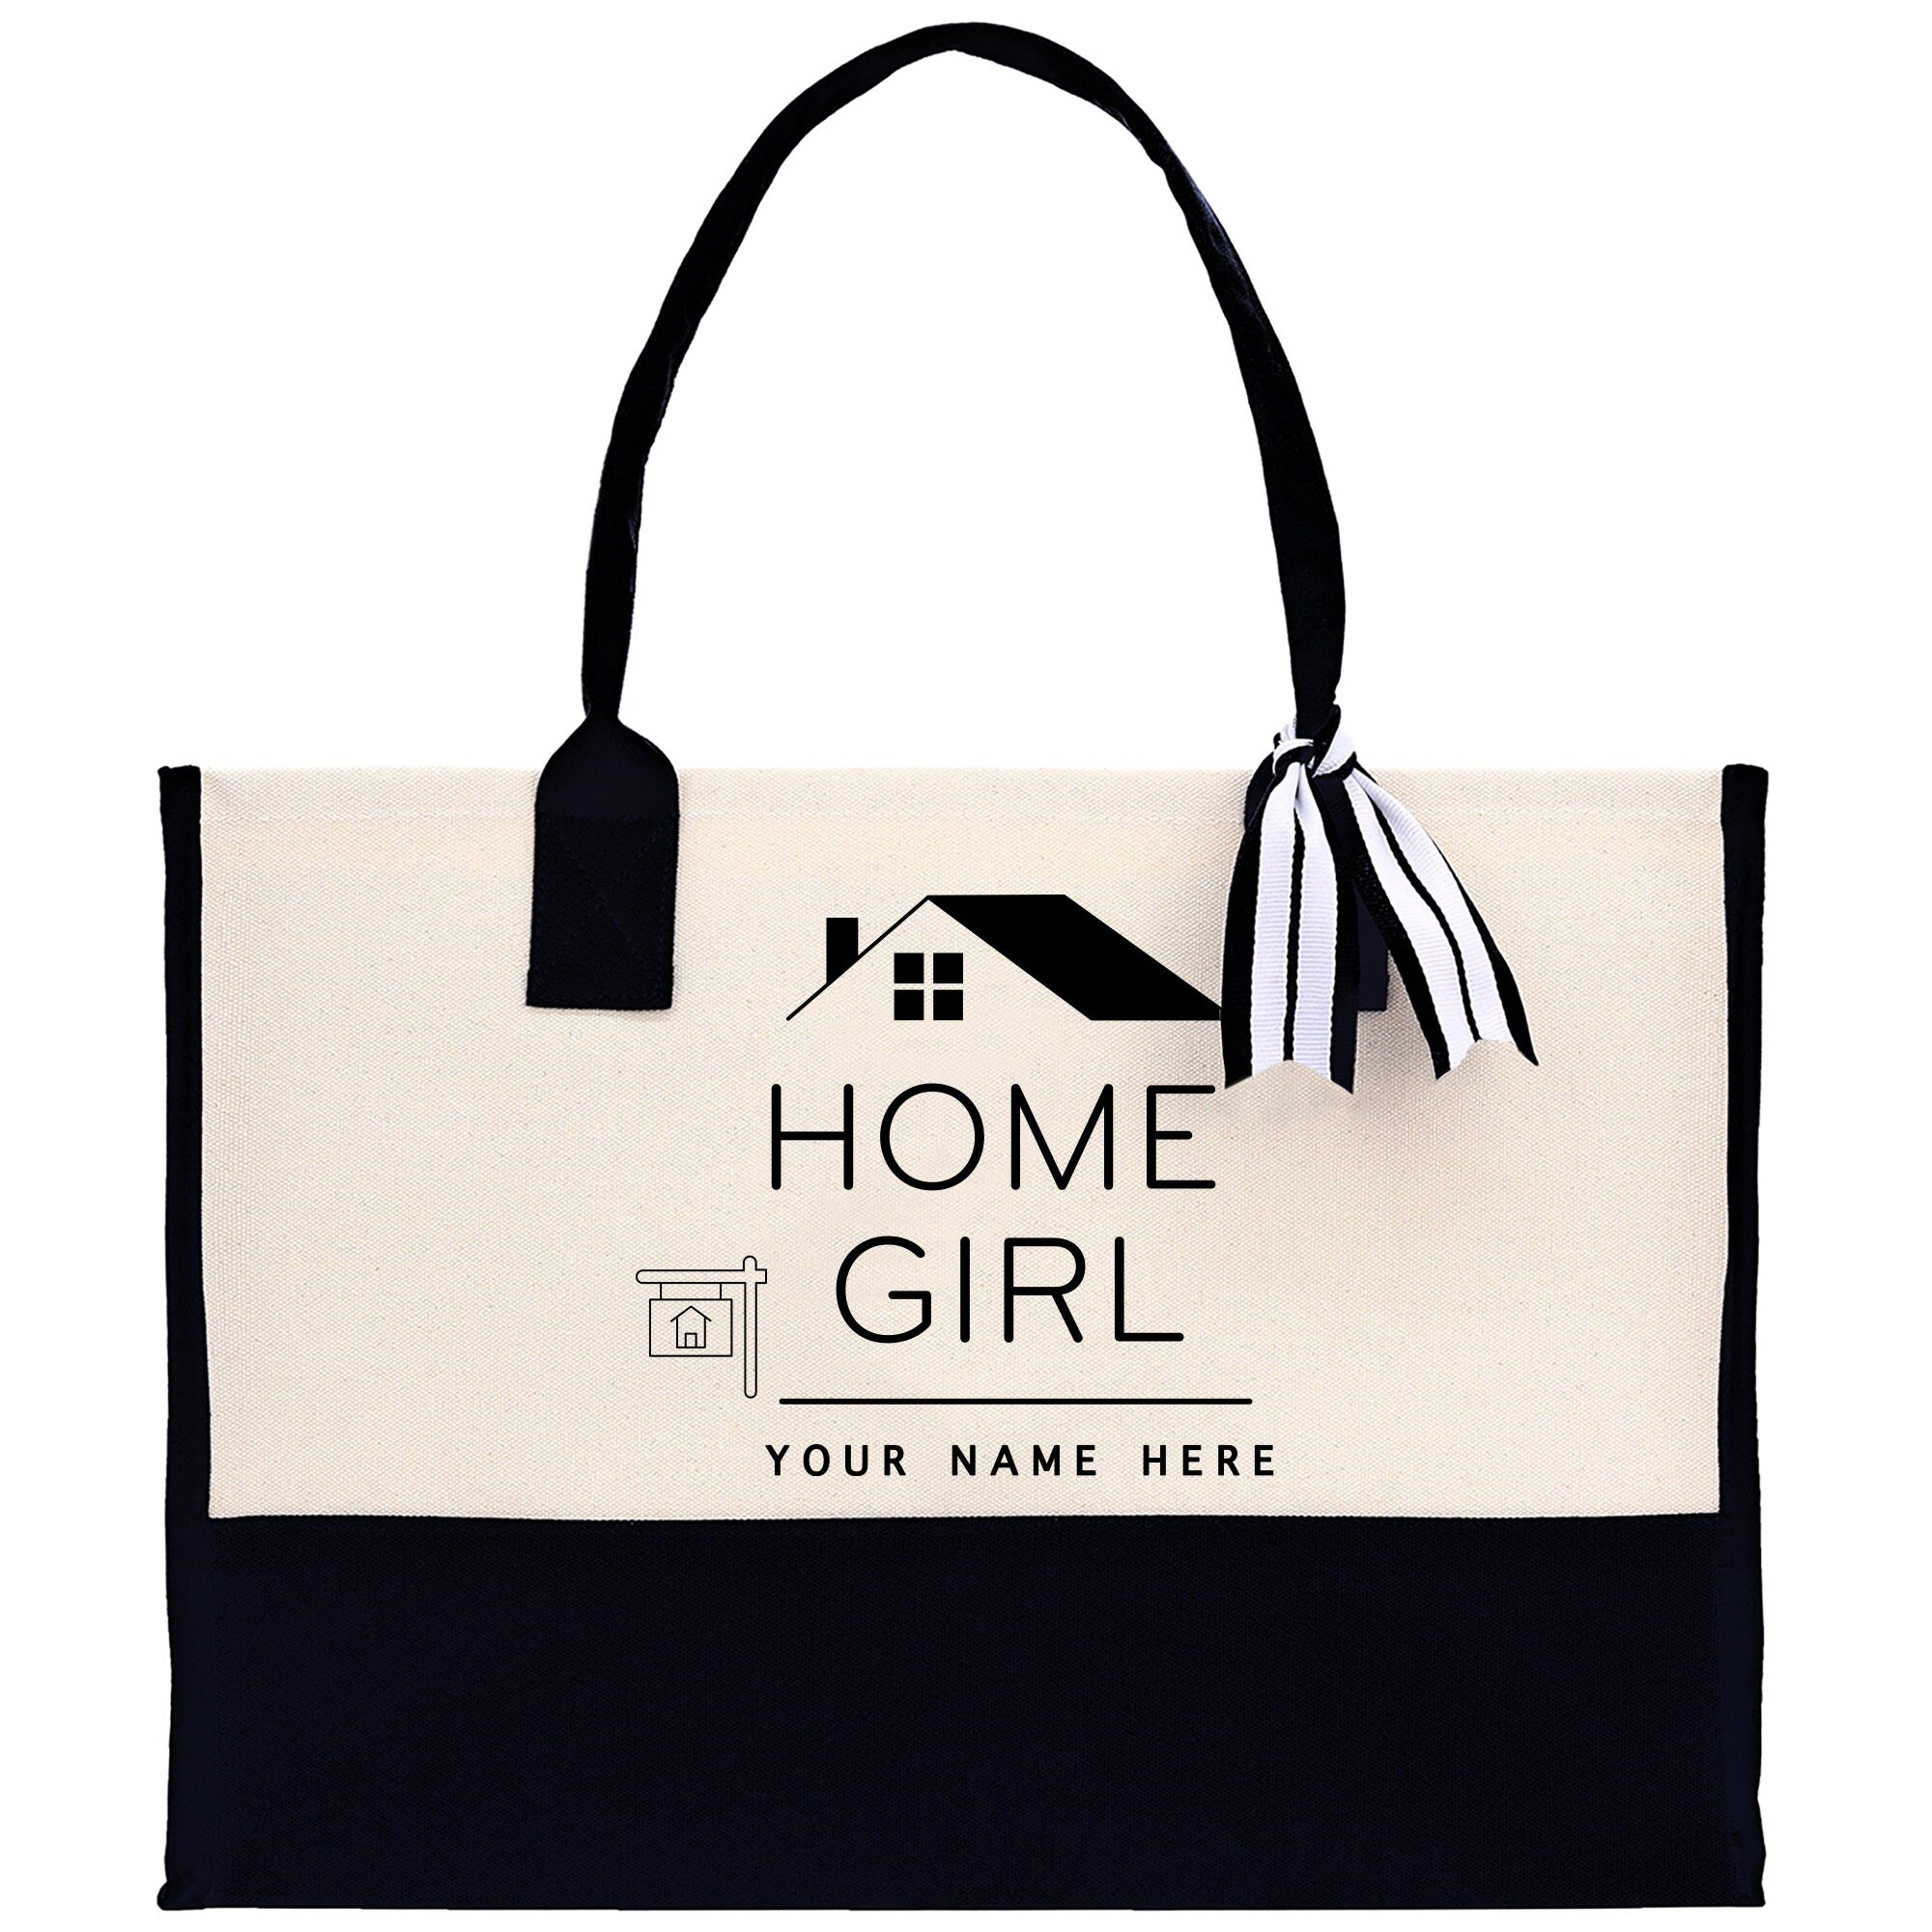 a black and white bag with a house on it